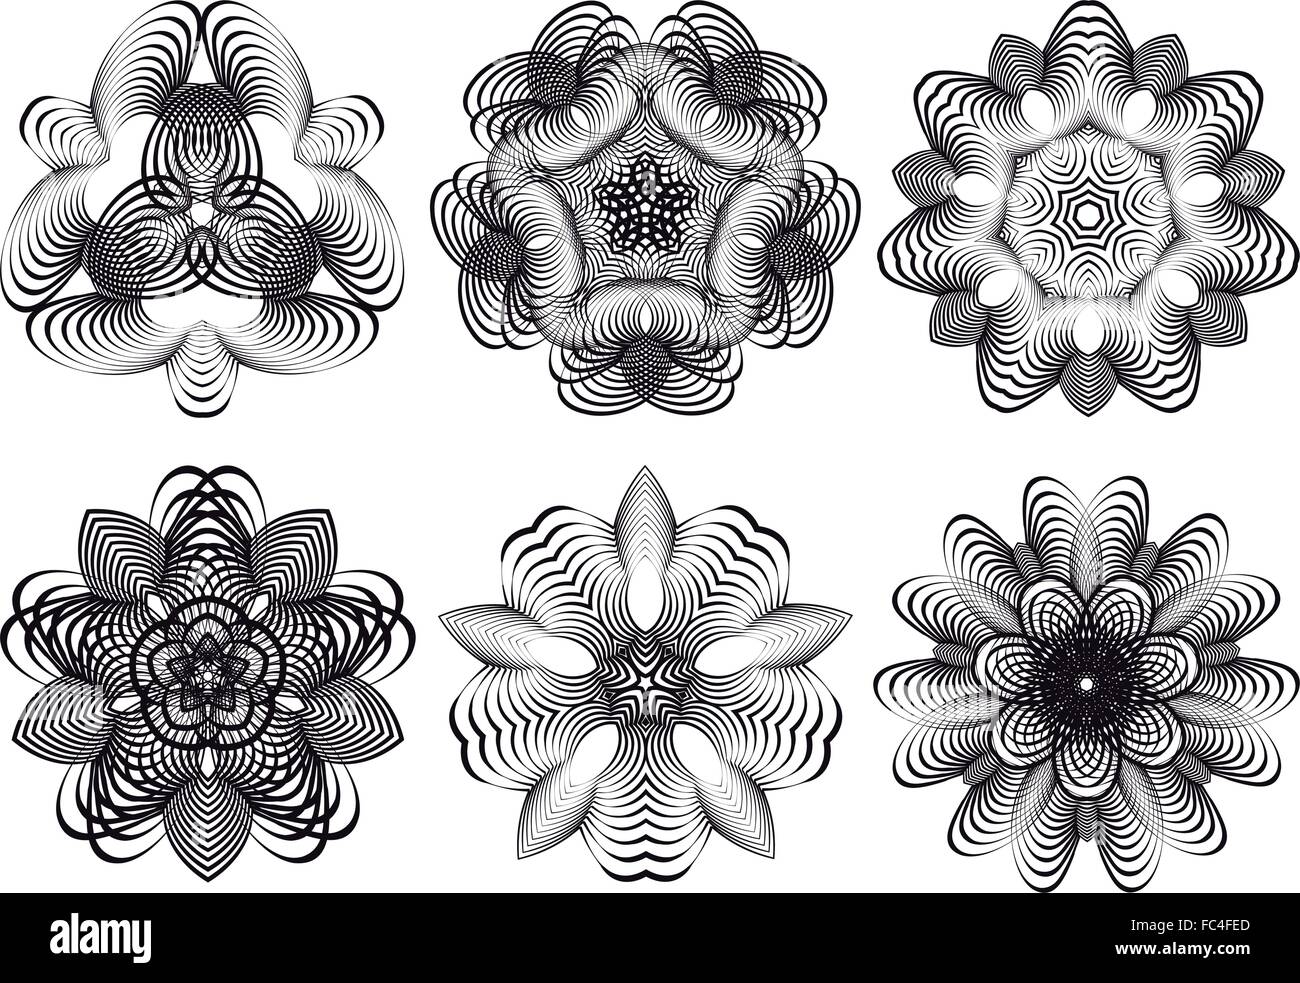 Set of abstract geometric flowers, vector design elements Stock Vector